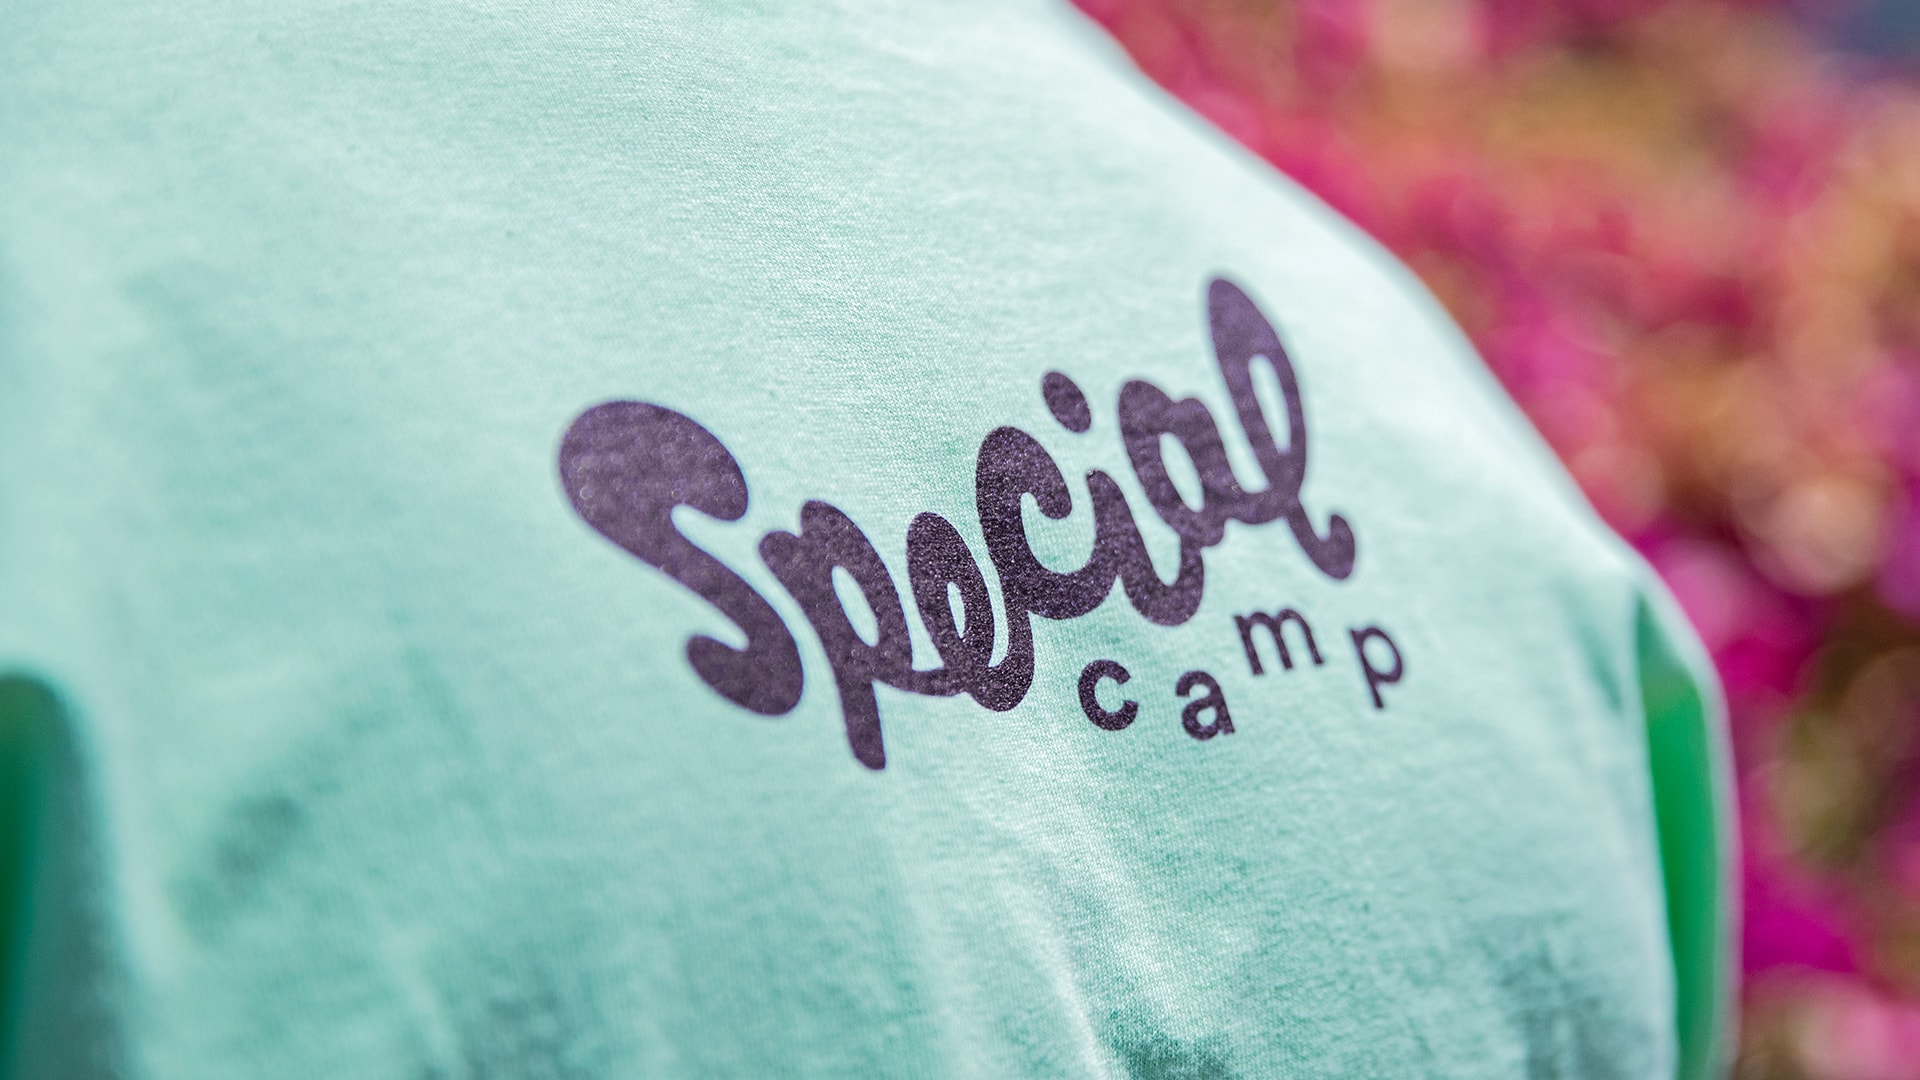 Special camp releases rebrand